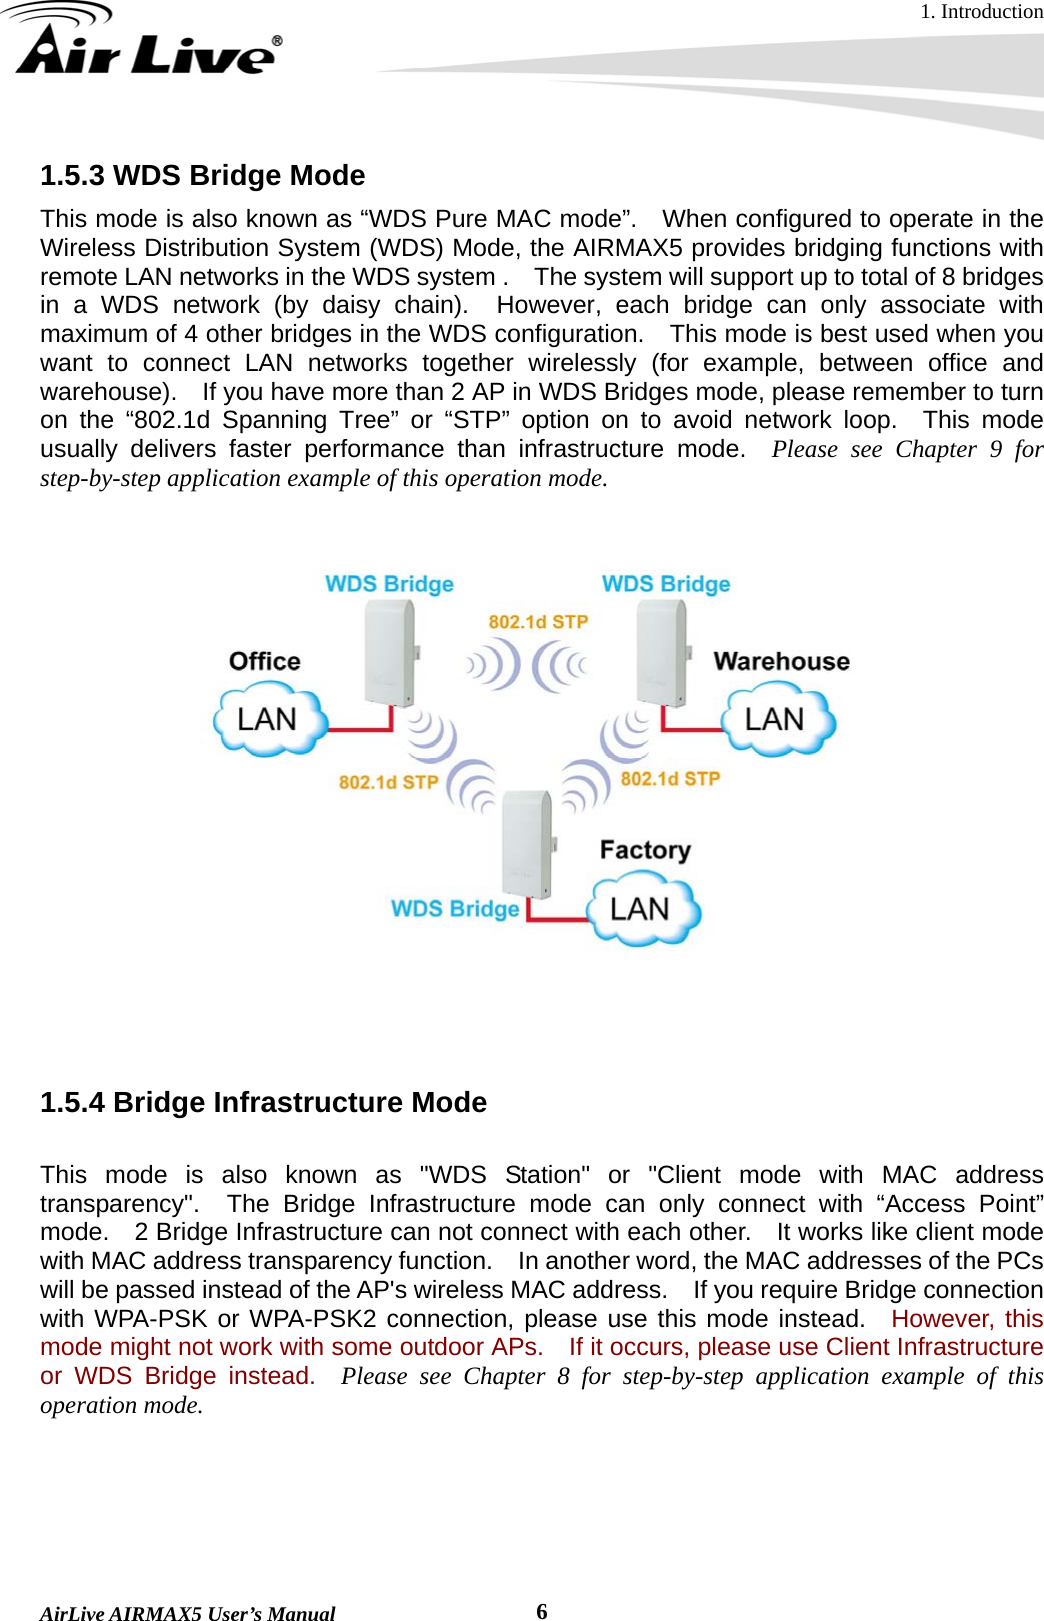 1. Introduction  AirLive AIRMAX5 User’s Manual  61.5.3 WDS Bridge Mode   This mode is also known as “WDS Pure MAC mode”.    When configured to operate in the Wireless Distribution System (WDS) Mode, the AIRMAX5 provides bridging functions with remote LAN networks in the WDS system .    The system will support up to total of 8 bridges in a WDS network (by daisy chain).  However, each bridge can only associate with maximum of 4 other bridges in the WDS configuration.    This mode is best used when you want to connect LAN networks together wirelessly (for example, between office and warehouse).    If you have more than 2 AP in WDS Bridges mode, please remember to turn on the “802.1d Spanning Tree” or “STP” option on to avoid network loop.  This mode usually delivers faster performance than infrastructure mode.  Please see Chapter 9 for step-by-step application example of this operation mode.      1.5.4 Bridge Infrastructure Mode  This mode is also known as &quot;WDS Station&quot; or &quot;Client mode with MAC address transparency&quot;.  The Bridge Infrastructure mode can only connect with “Access Point” mode.    2 Bridge Infrastructure can not connect with each other.    It works like client mode with MAC address transparency function.    In another word, the MAC addresses of the PCs will be passed instead of the AP&apos;s wireless MAC address.    If you require Bridge connection with WPA-PSK or WPA-PSK2 connection, please use this mode instead.  However, this mode might not work with some outdoor APs.    If it occurs, please use Client Infrastructure or WDS Bridge instead.  Please see Chapter 8 for step-by-step application example of this operation mode. 